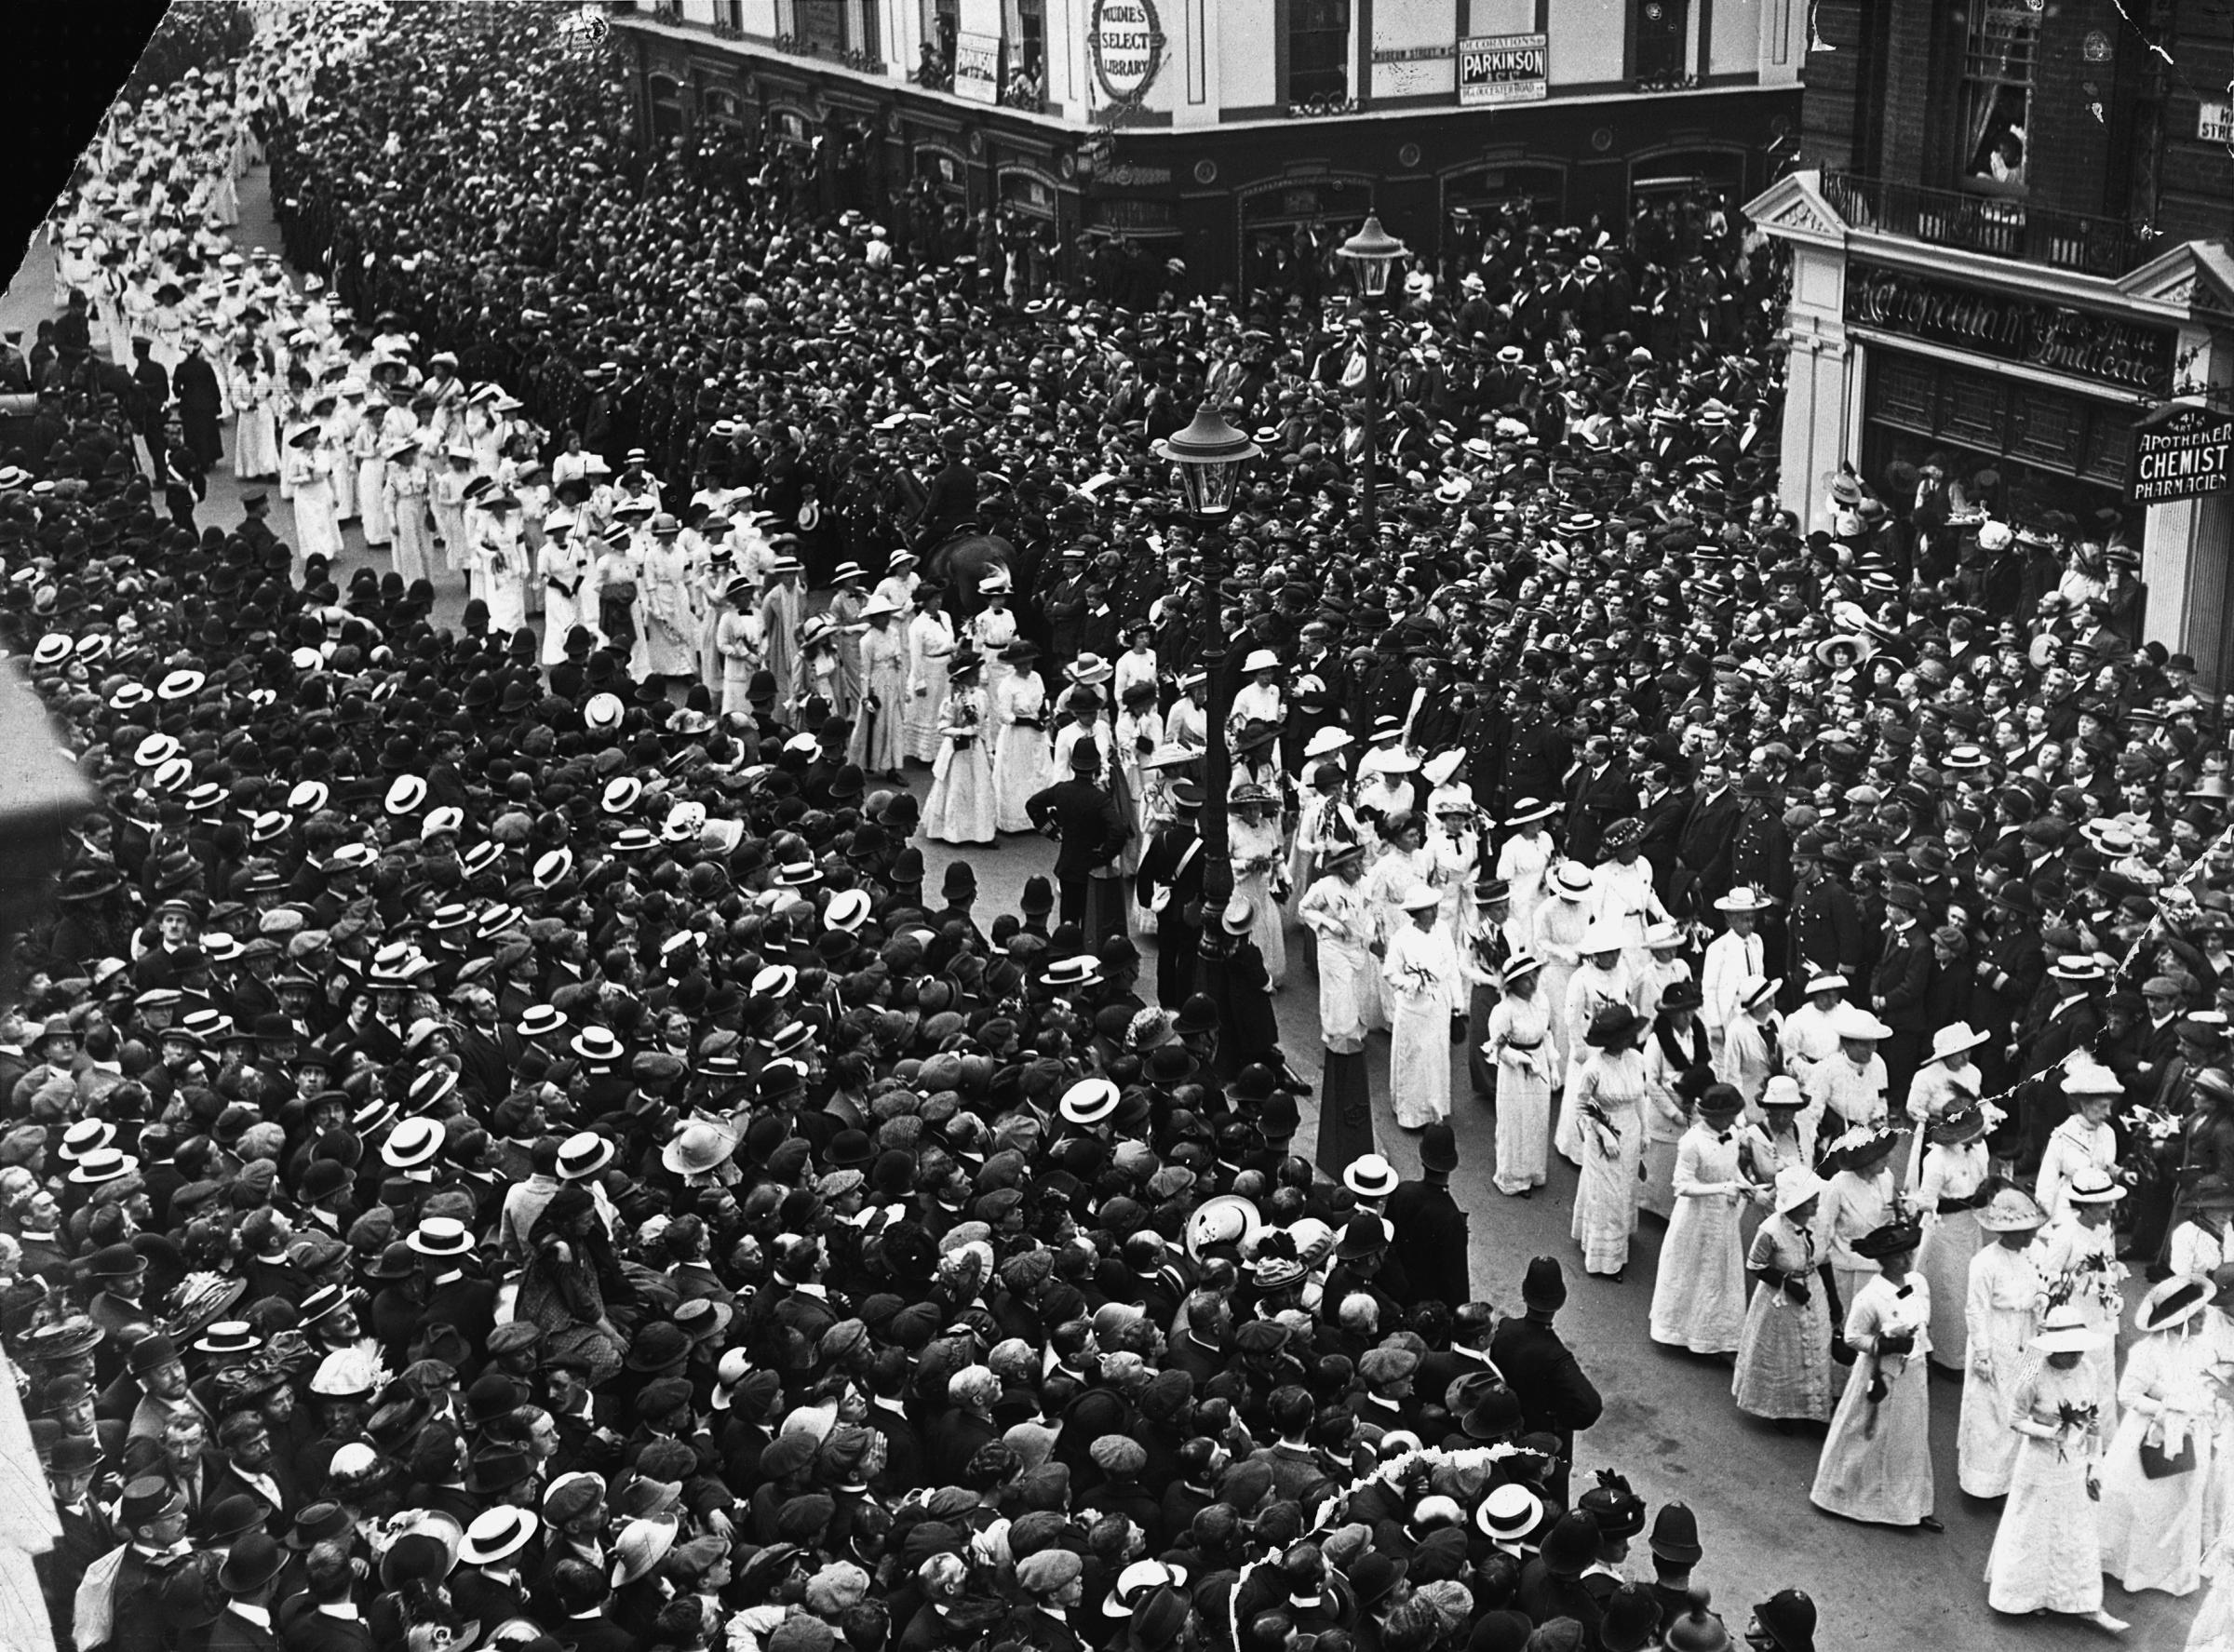 Suffragette's Funeral